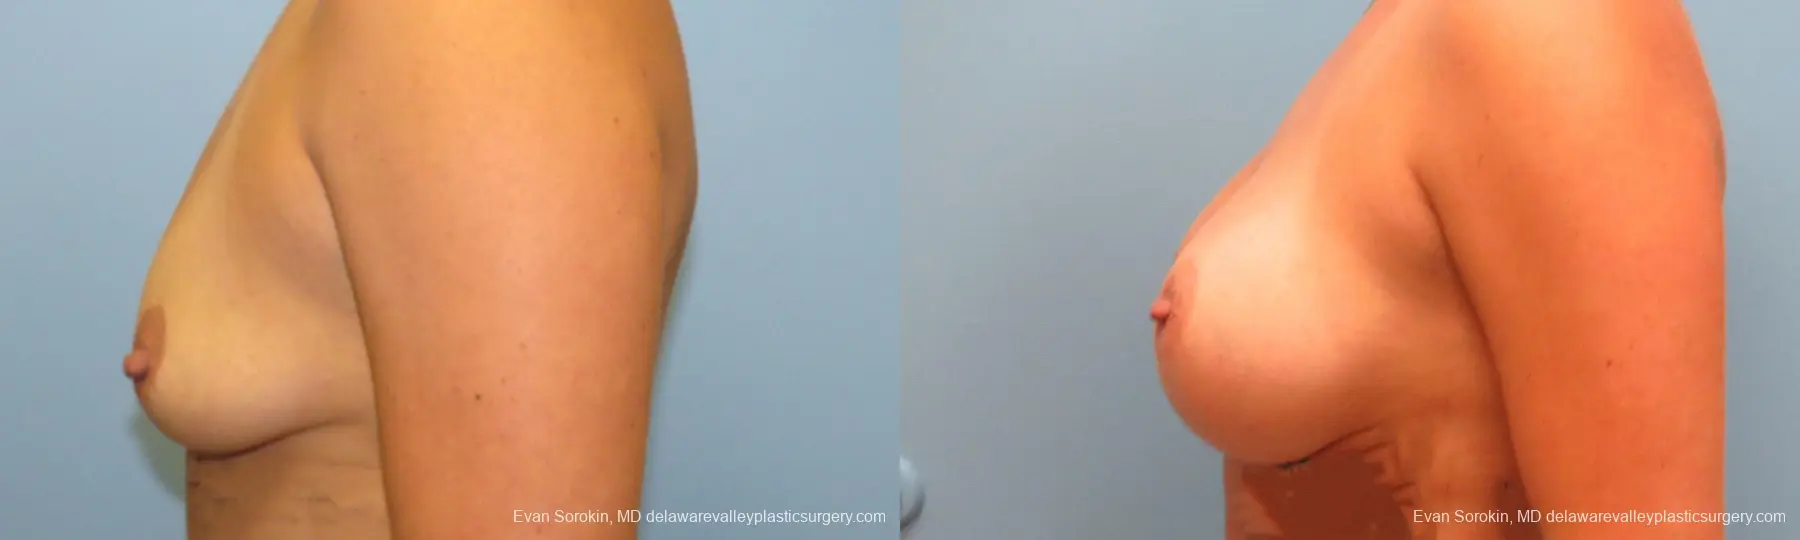 Philadelphia Breast Augmentation 9388 - Before and After 5